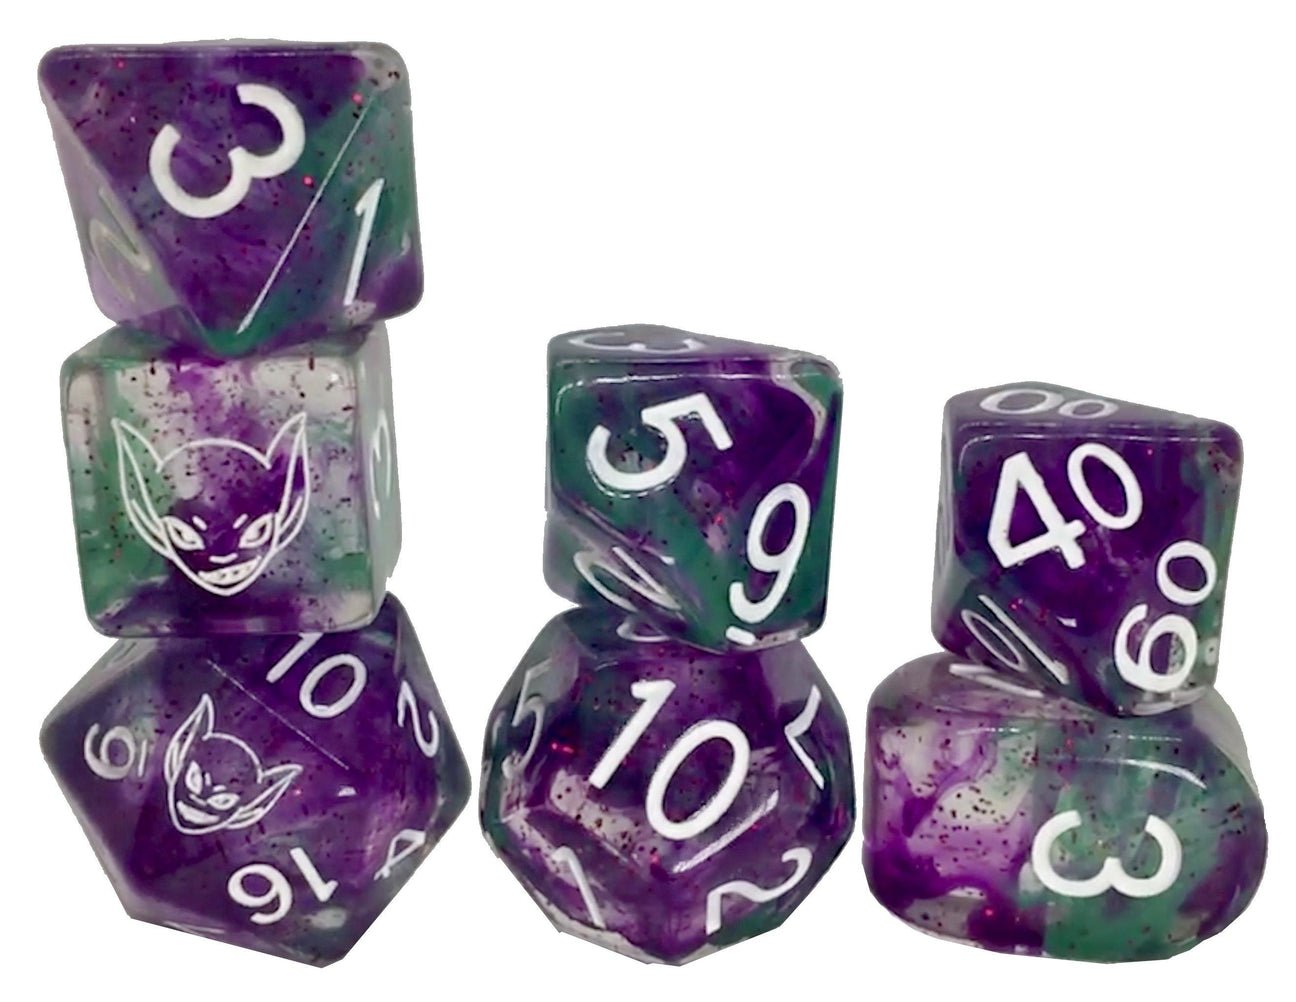 Goblin Green (Diffusion) - 7 dice set (with Arch’d4™) - The Fourth Place